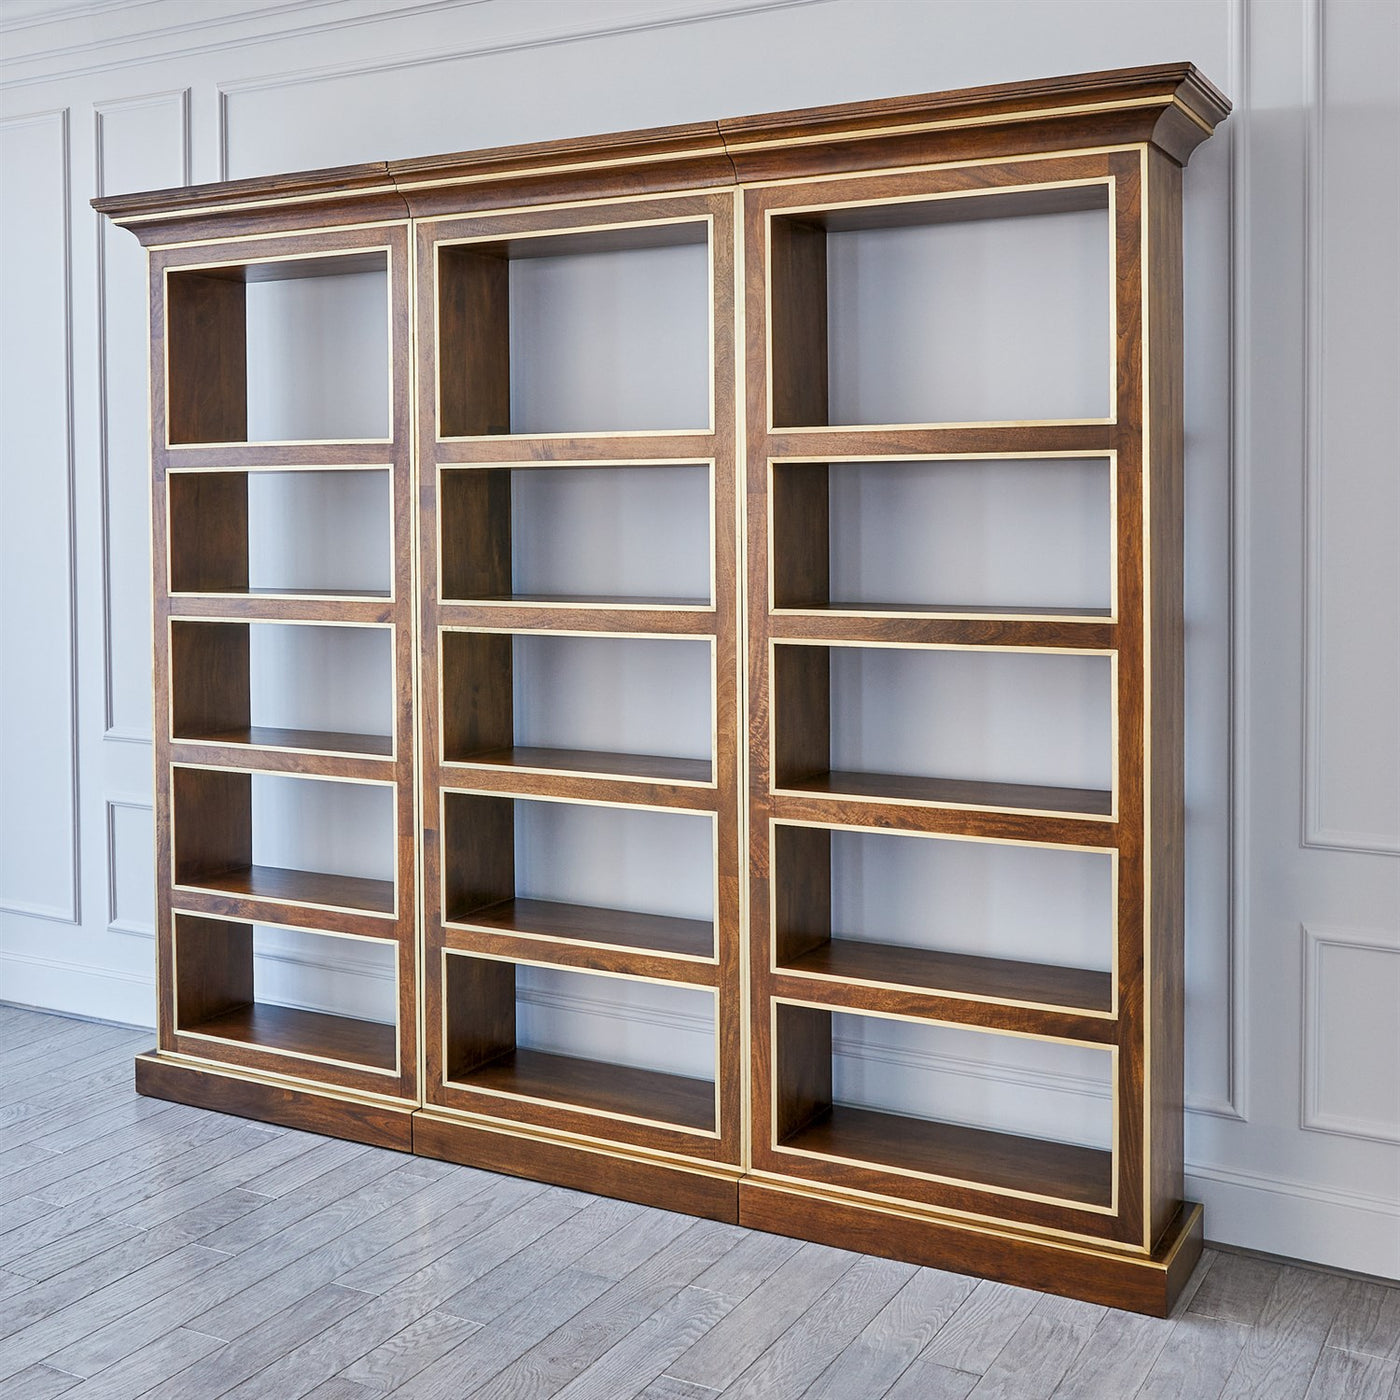 Center Library Bookcase by Global Views